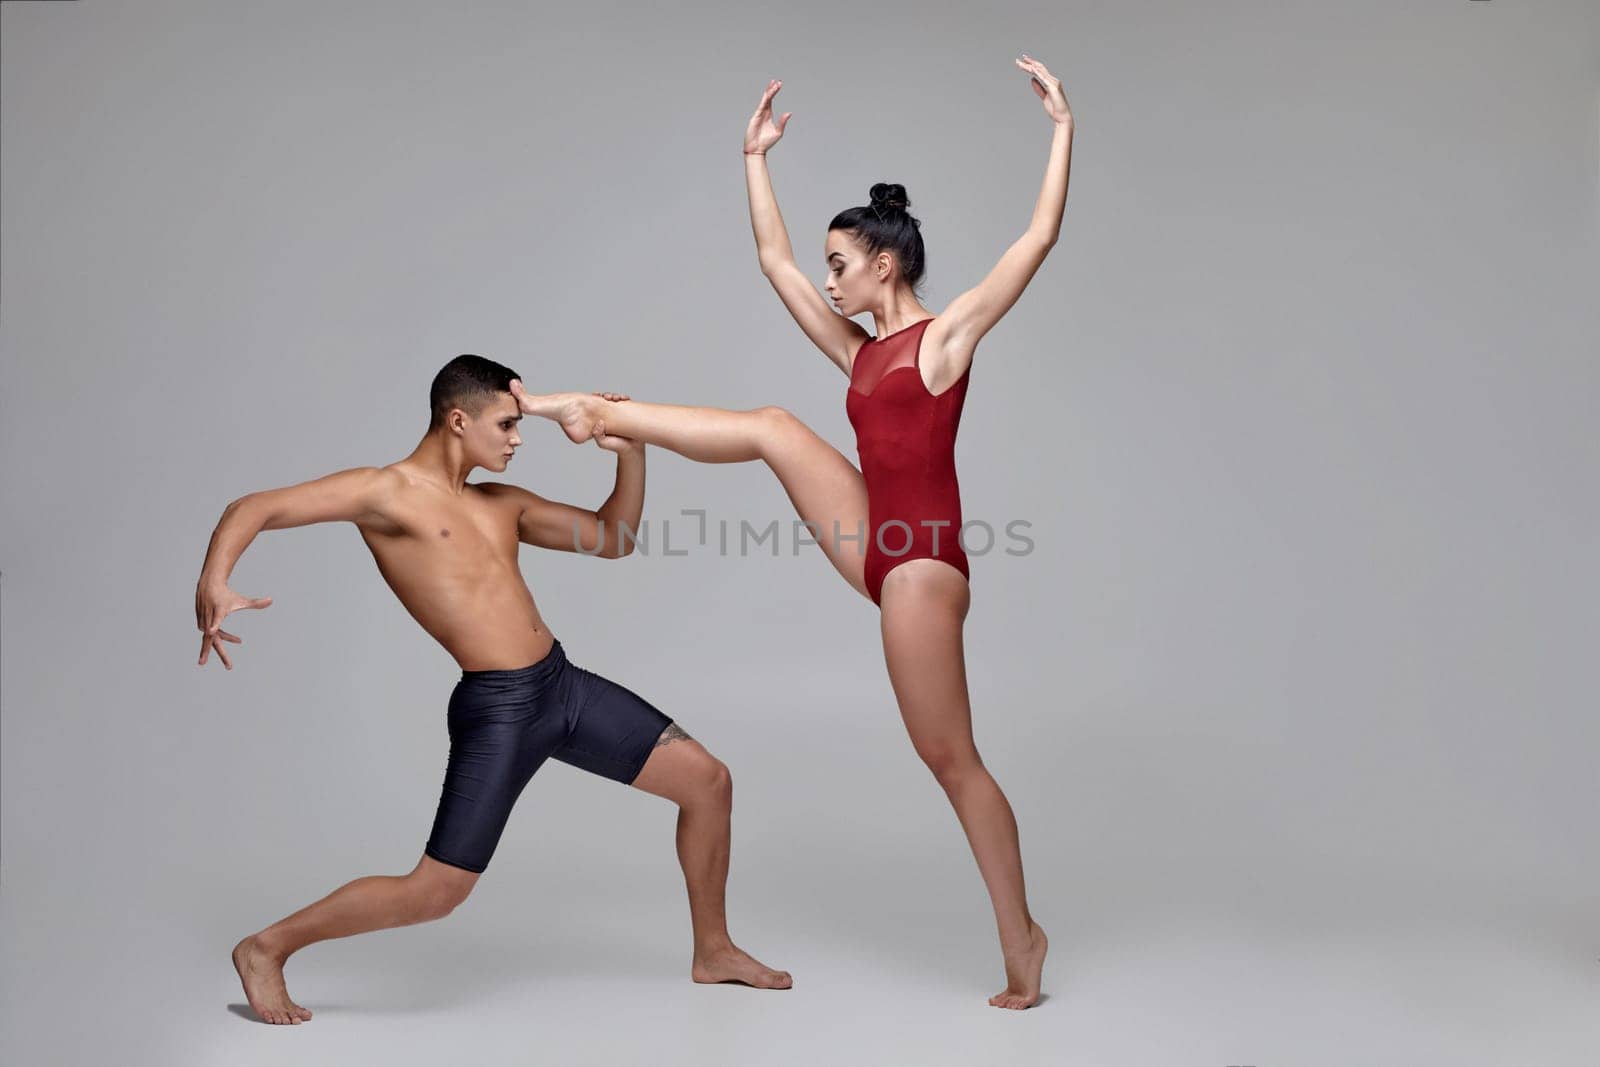 Pair of a graceful ballet dancers are posing over a gray studio background. Man in black shorts and woman in a red swimwear are dancing together. Ballet and contemporary choreography concept. Art photo.